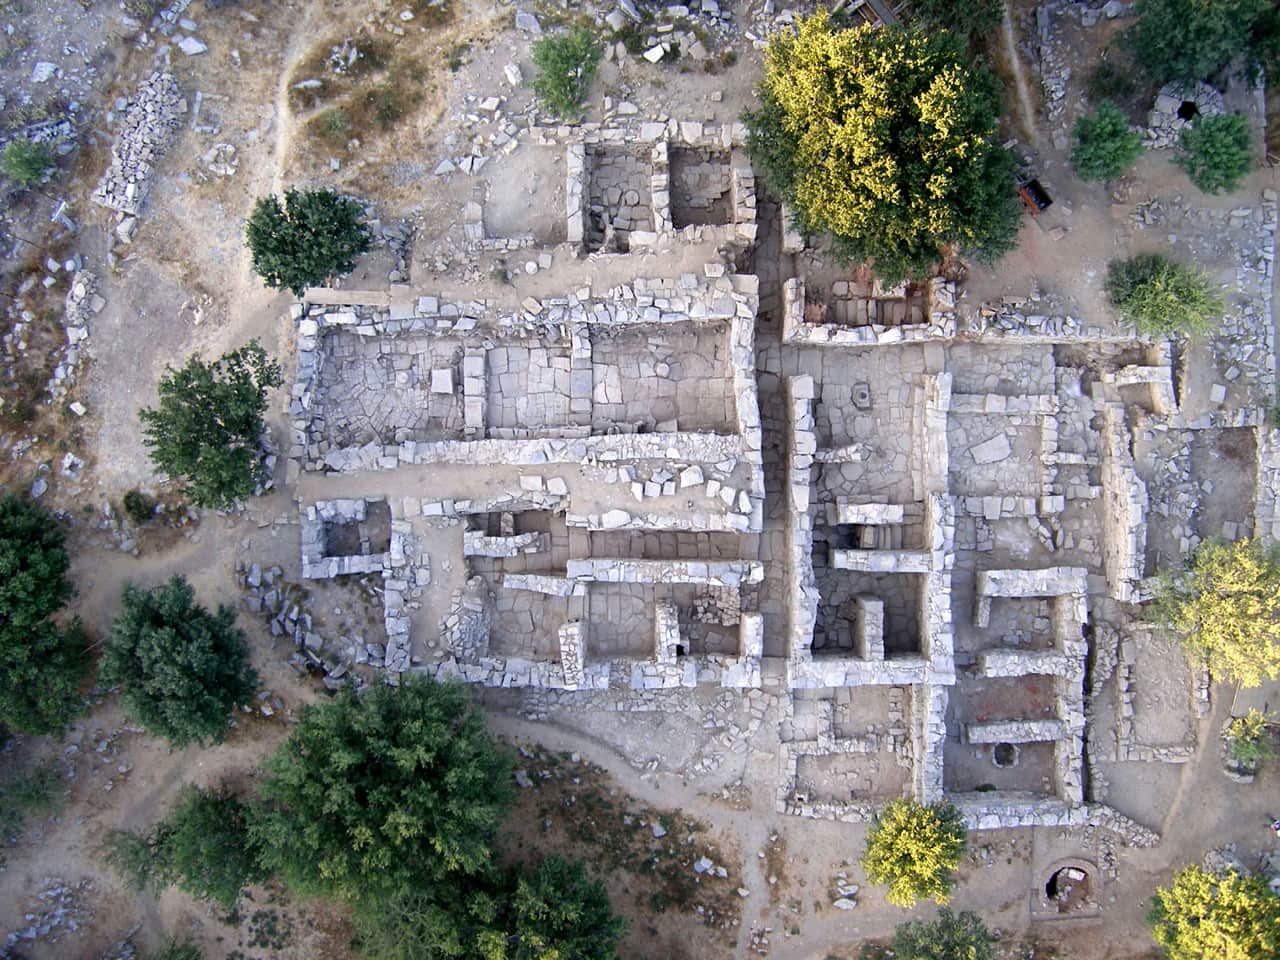 Zominthos Excavation on Crete Reveals New Minoan Finds